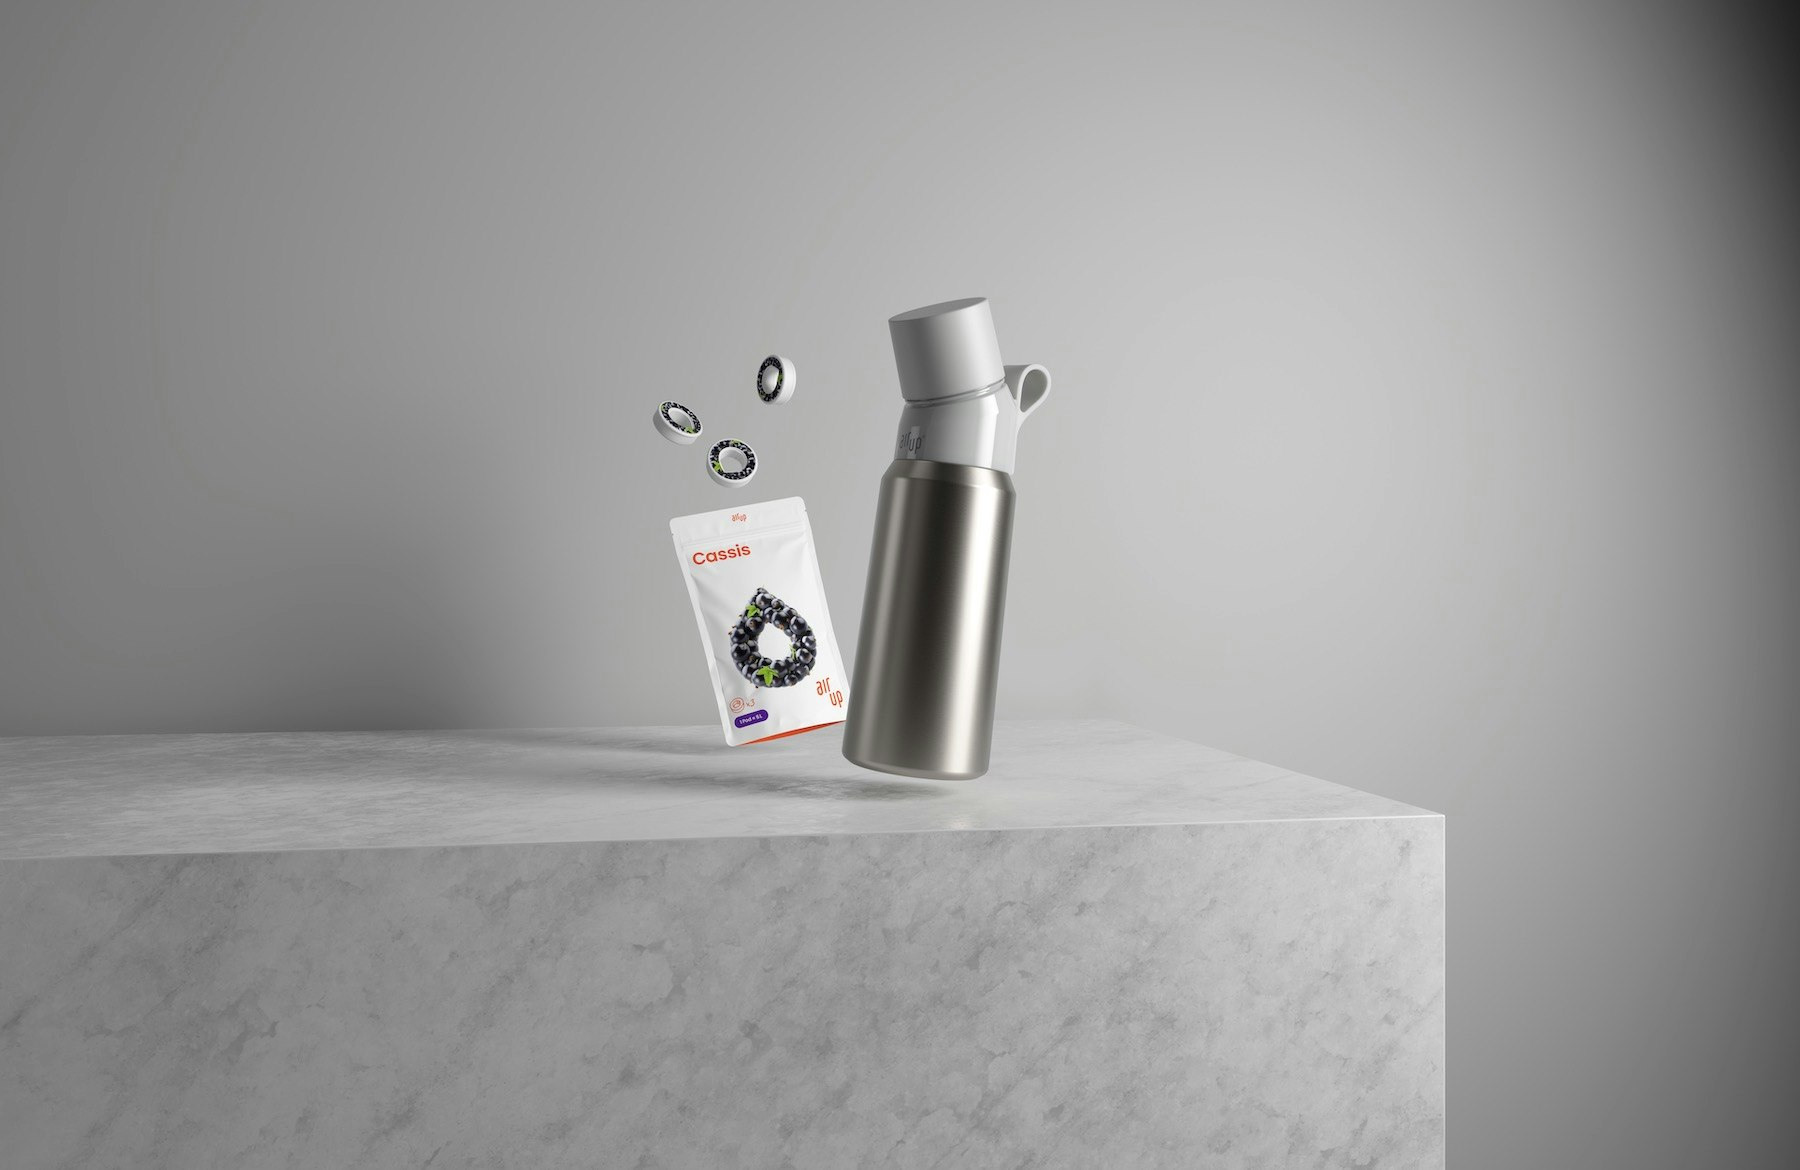 A photo of a black and silver air up bottle and pods on a grey table and background 